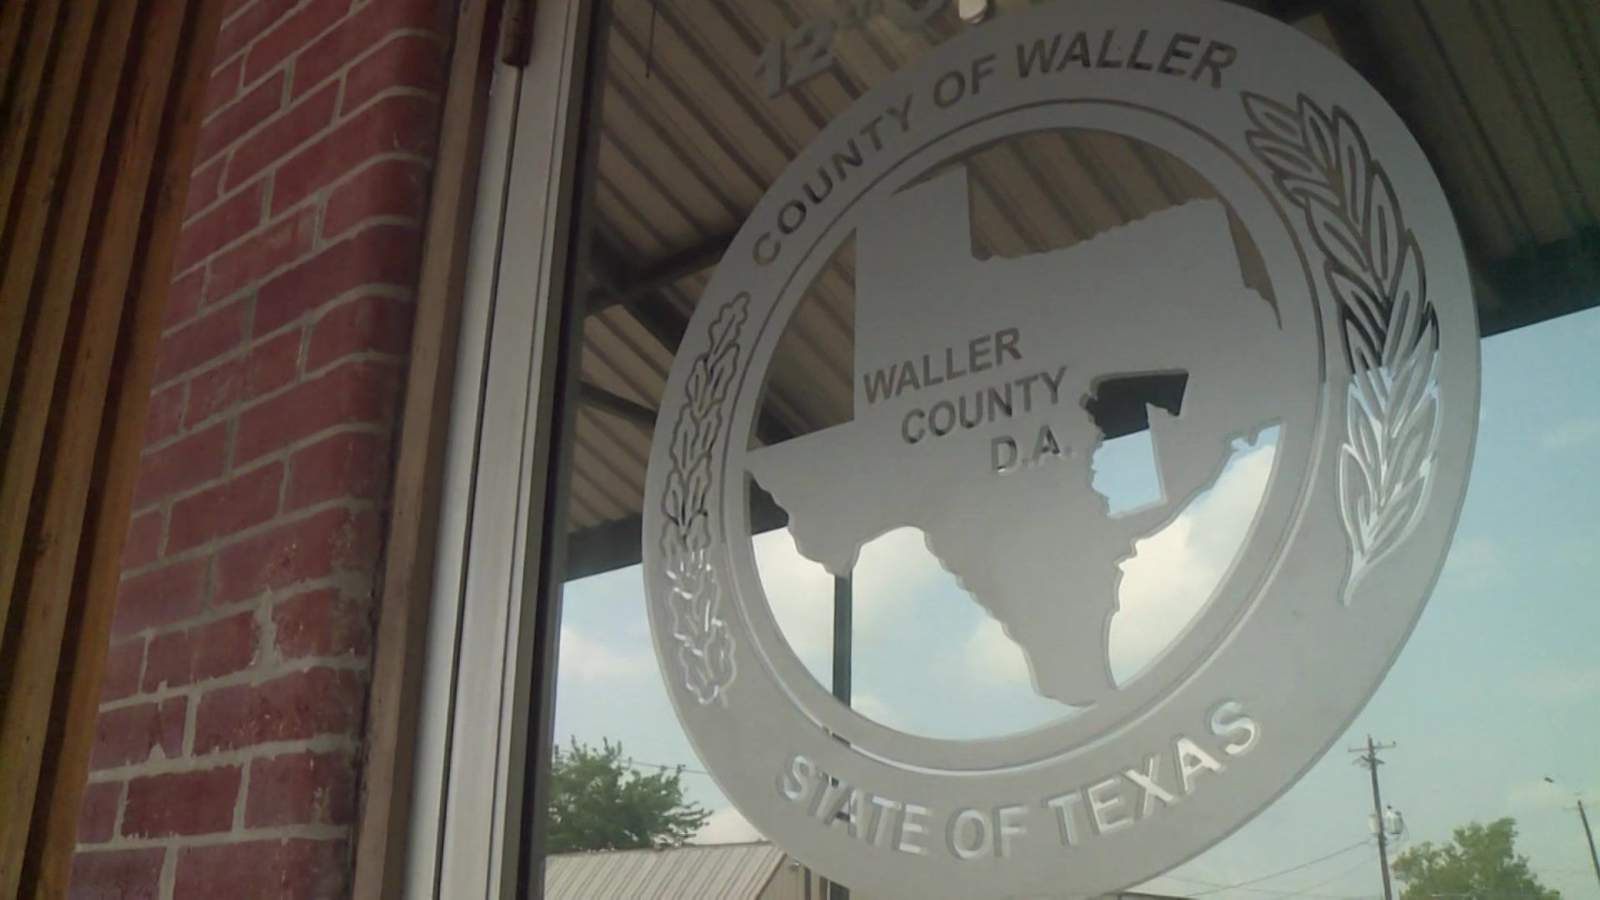 Waller Co. DA investigator indicted on drug, money laundering charges